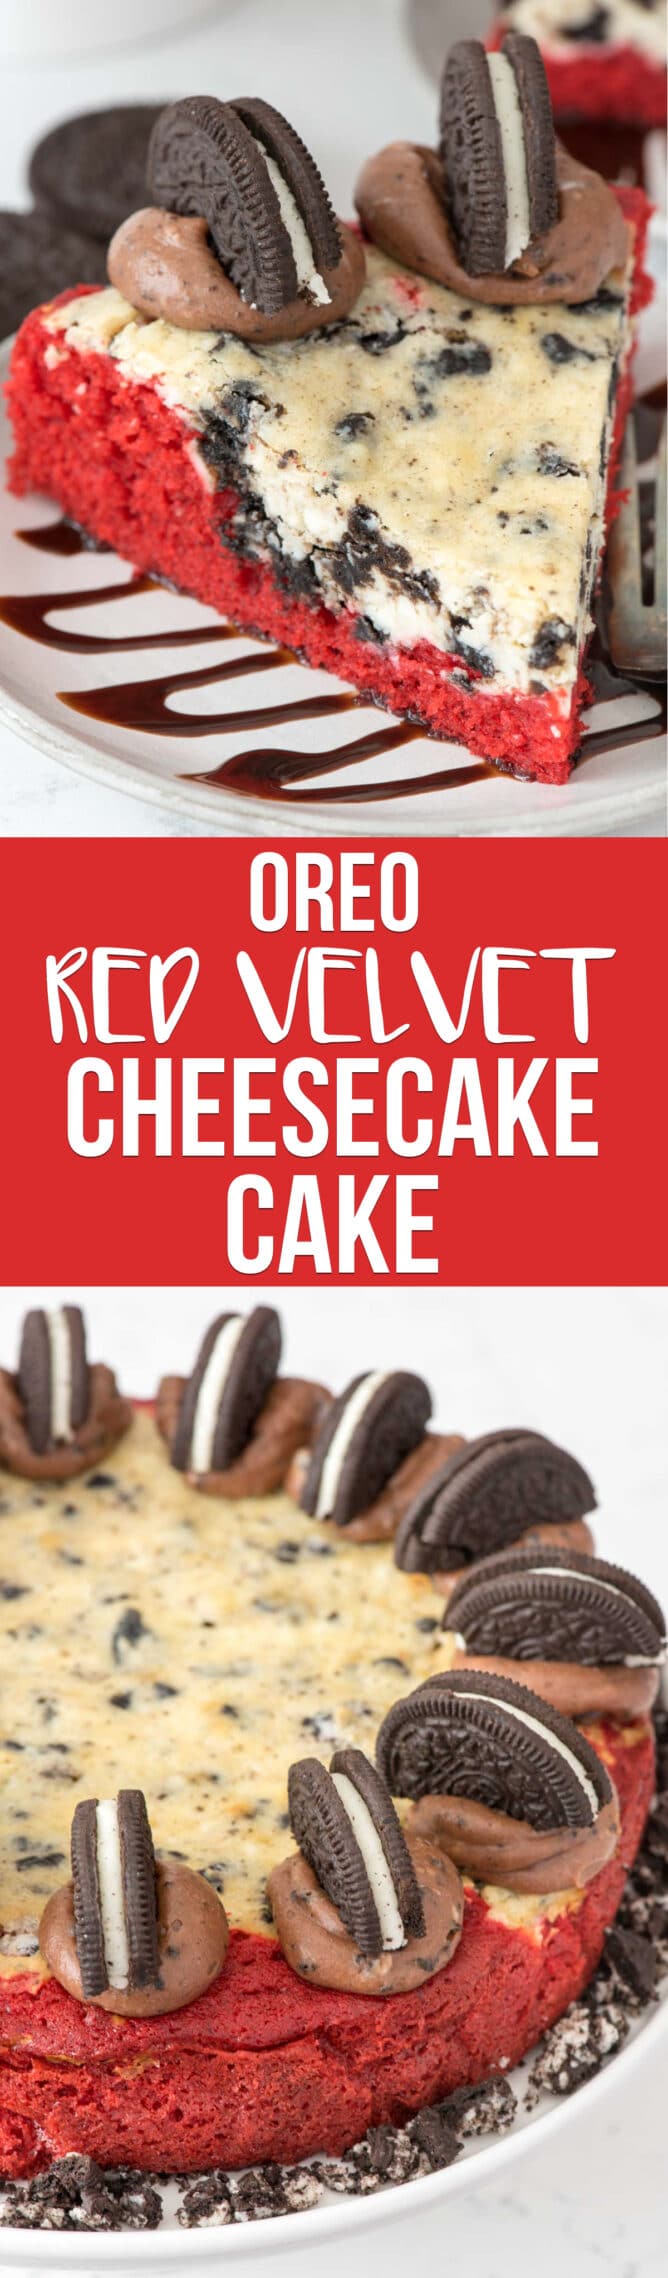 Photo collage of Oreo Red Velvet Cheesecake with recipe title in the middle of two photos